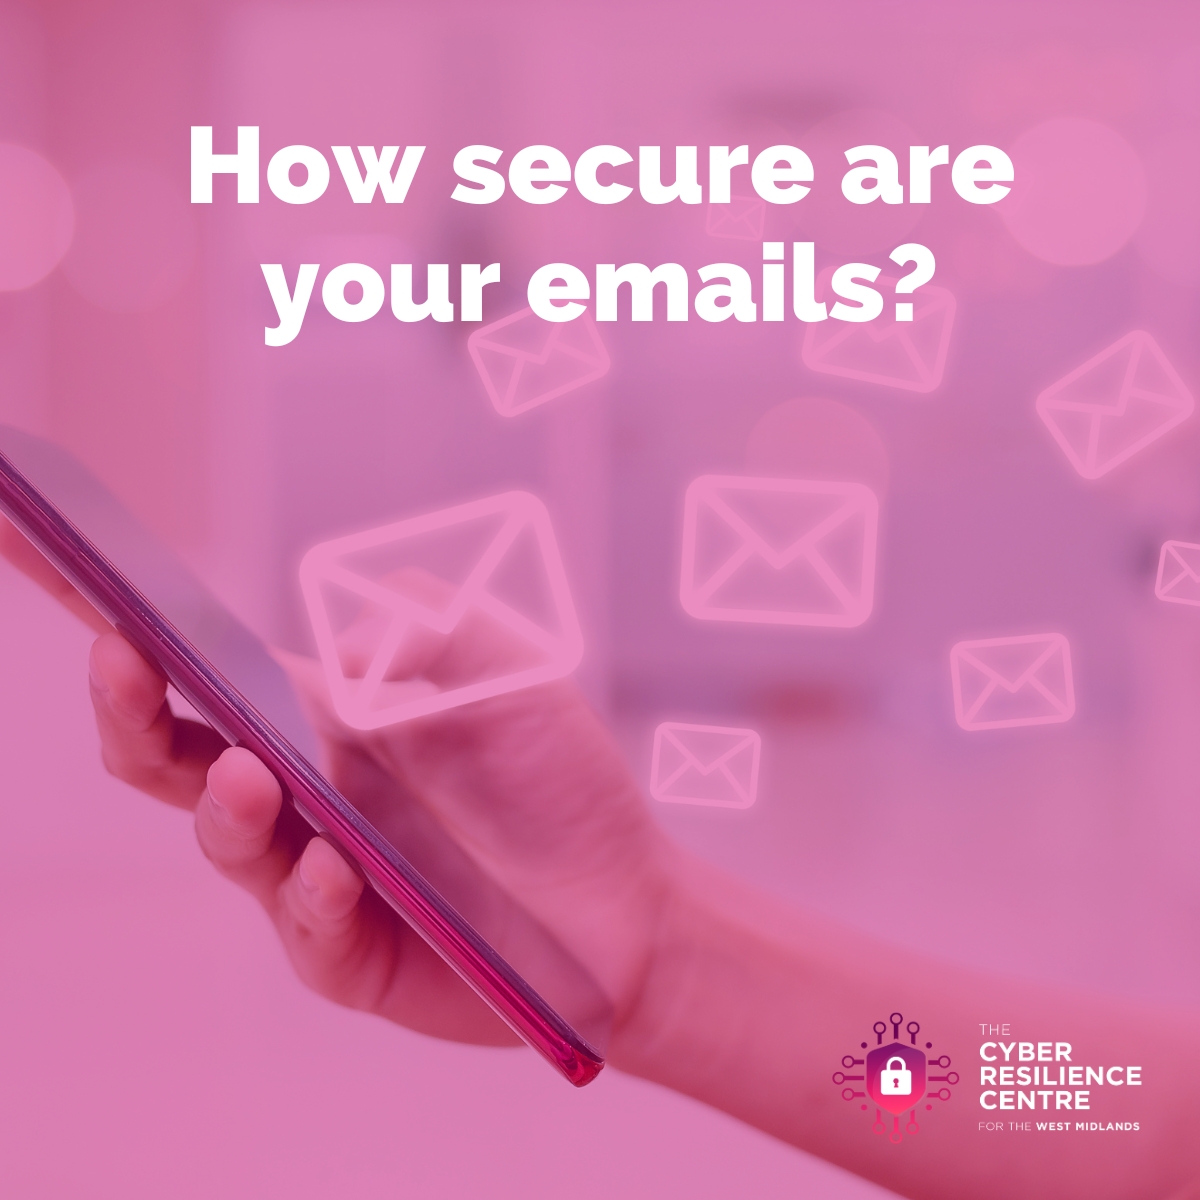 Recent data shows 32% of small businesses faced breaches last year. With @NCSC's free online tool, you can quickly check your email security and protect your brand. Over 120,000 domains already secured! Click this link: basiccheck.service.ncsc.gov.uk/email-security…